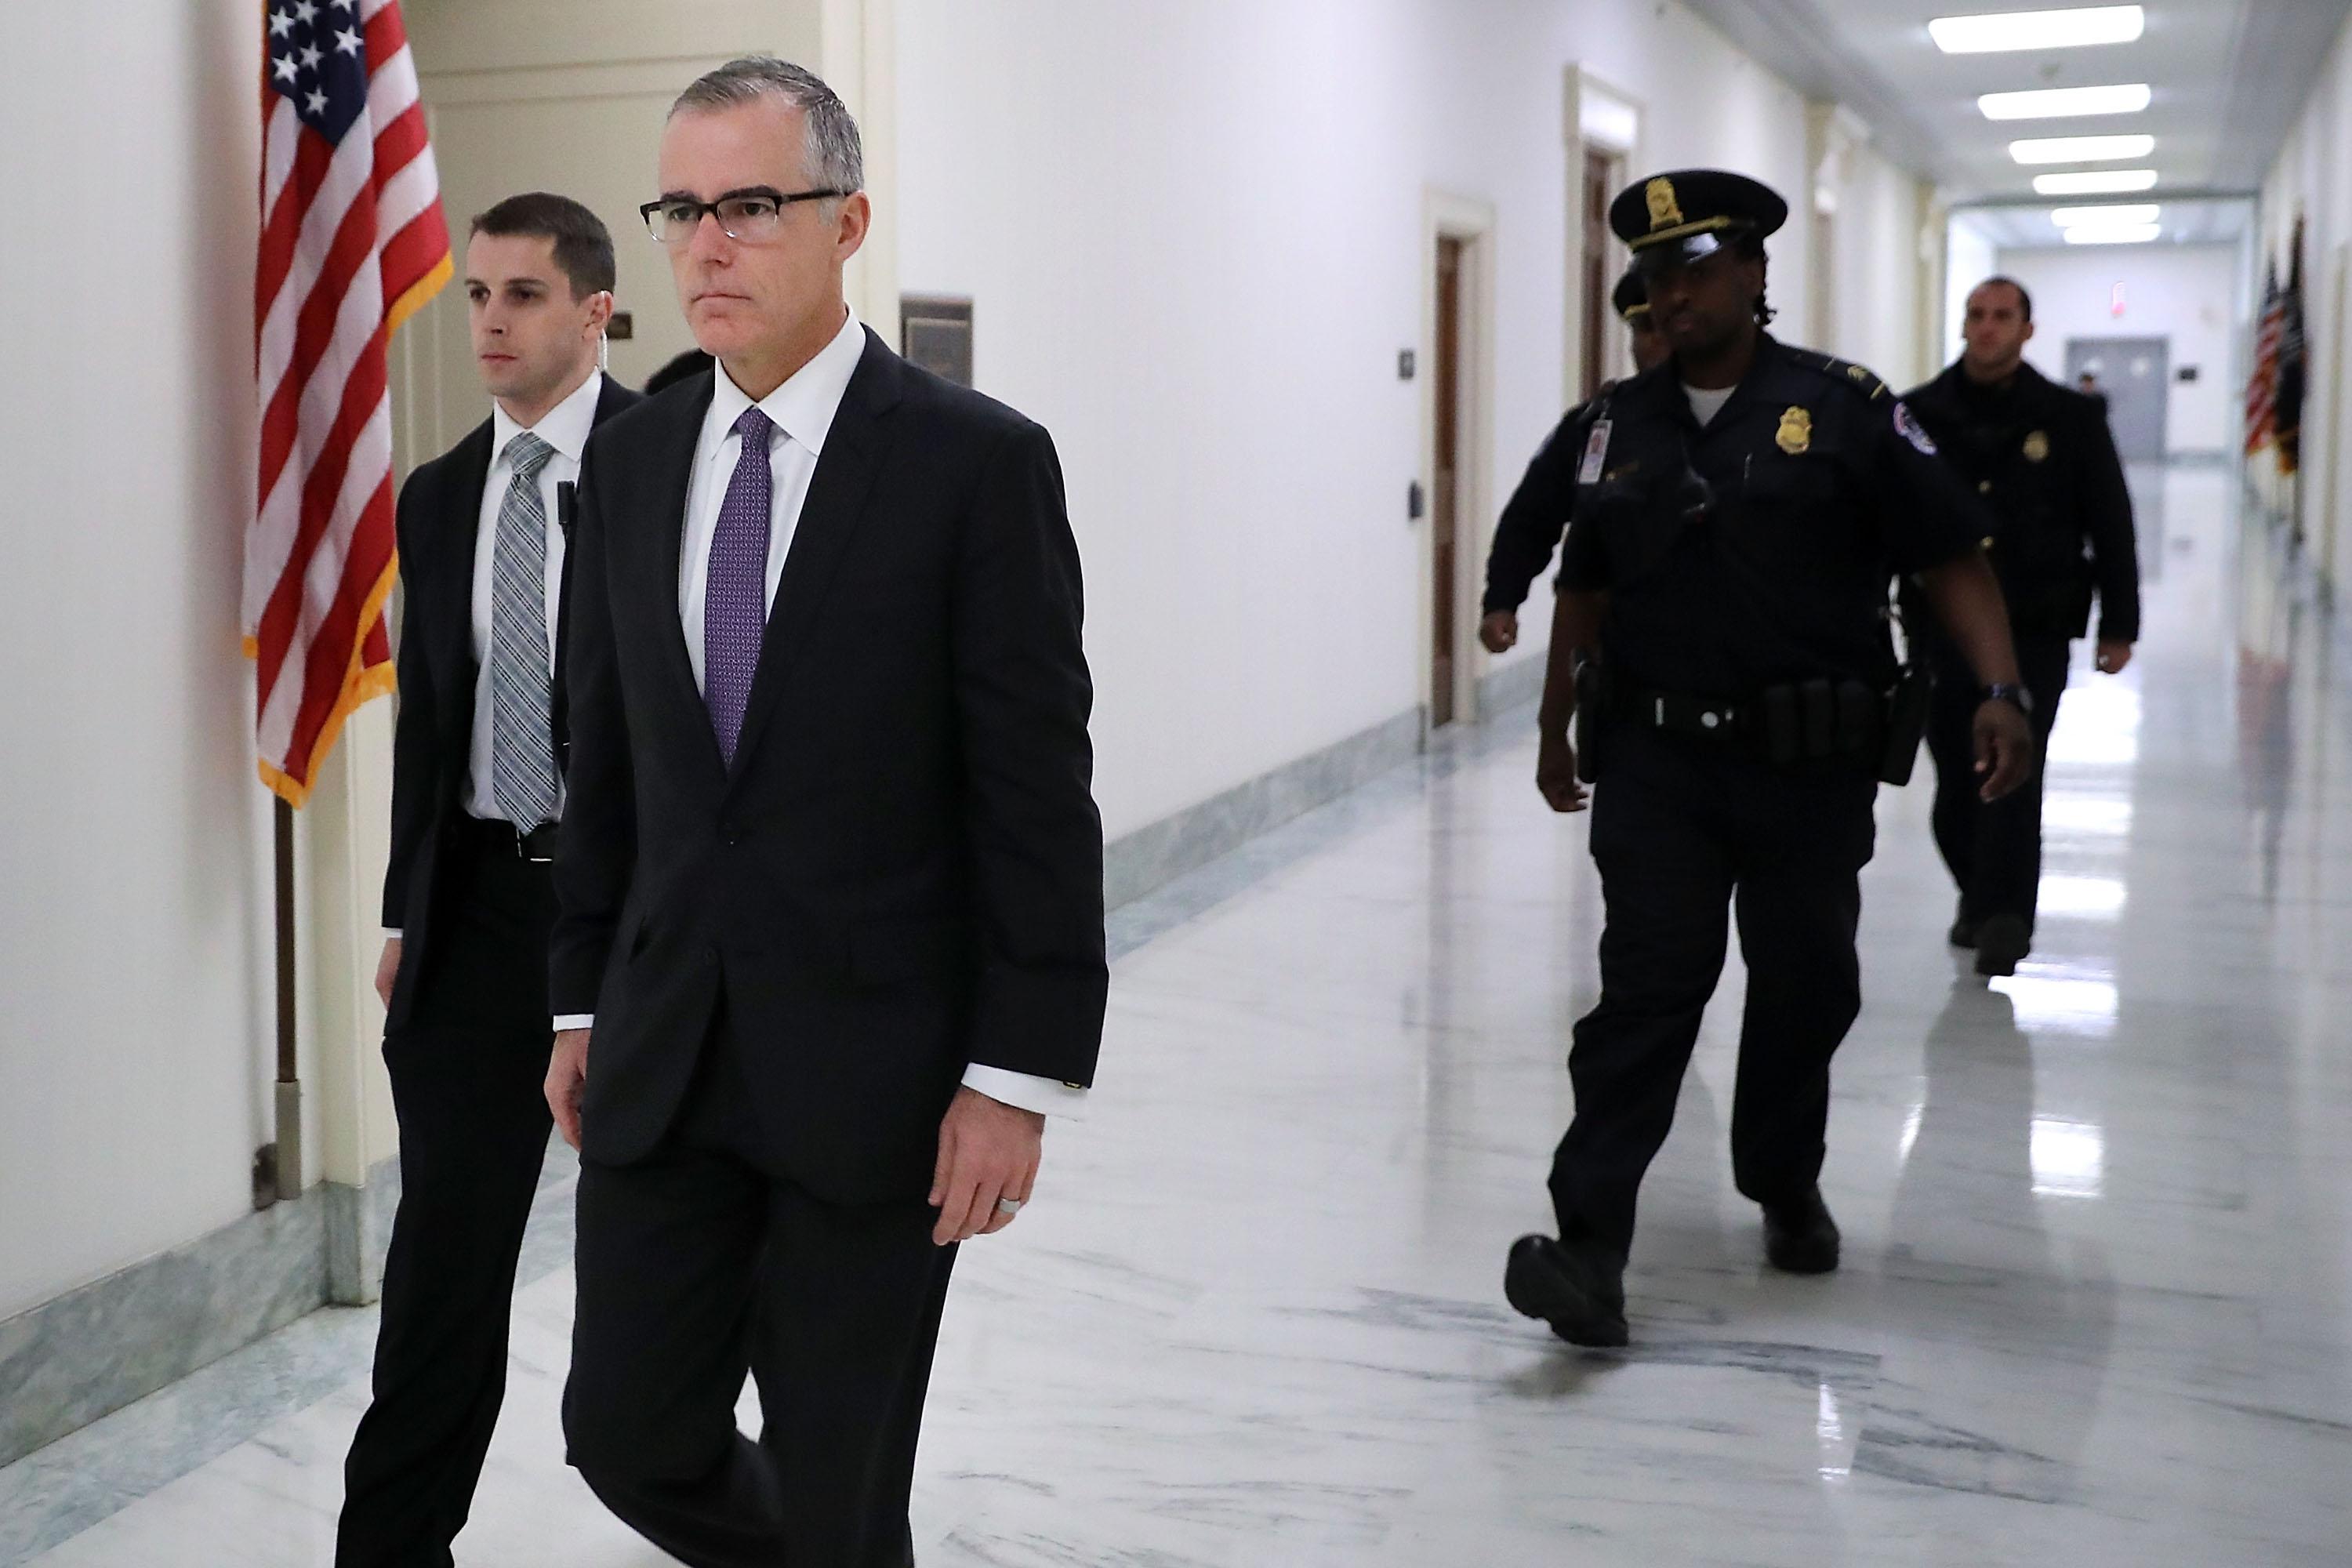 Andrew McCabe is escorted by U.S. Capitol Police before a meeting with members of the Oversight and Government Reform and Judiciary committees in the Rayburn House Office Building December 21, 2017 in Washington, DC.